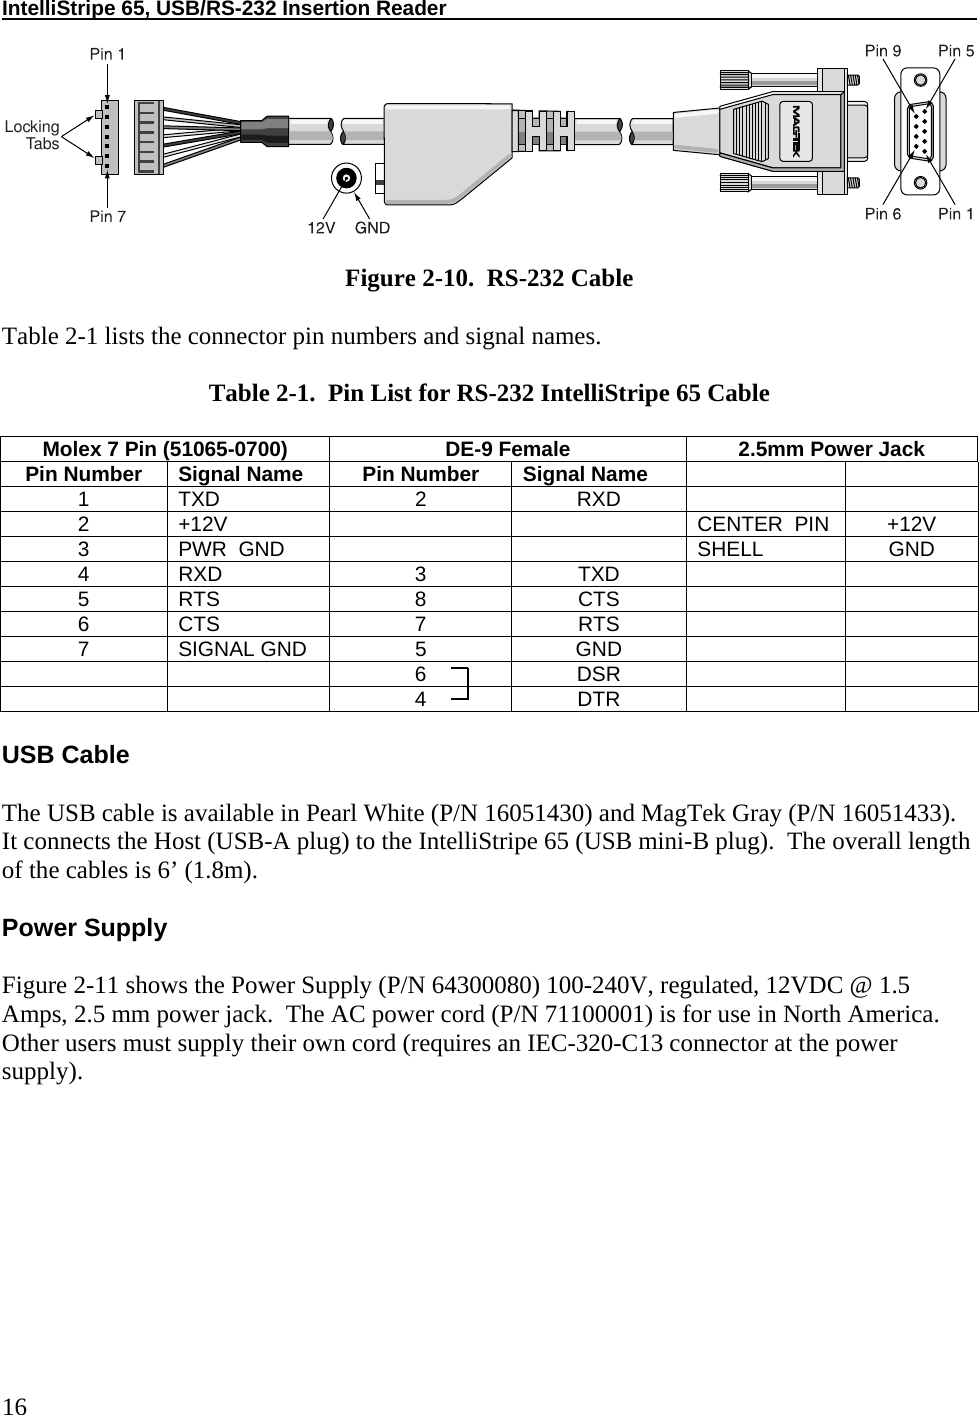 IntelliStripe 65, USB/RS-232 Insertion Reader     16 LockingTabs  Figure 2-10.  RS-232 Cable  Table 2-1 lists the connector pin numbers and signal names.  Table 2-1.  Pin List for RS-232 IntelliStripe 65 Cable  Molex 7 Pin (51065-0700)  DE-9 Female  2.5mm Power Jack Pin Number Signal Name Pin Number Signal Name   1 TXD  2  RXD    2  +12V      CENTER  PIN  +12V 3  PWR  GND      SHELL  GND 4 RXD  3  TXD    5 RTS  8  CTS    6 CTS  7  RTS    7 SIGNAL GND  5  GND       6  DSR       4  DTR     USB Cable  The USB cable is available in Pearl White (P/N 16051430) and MagTek Gray (P/N 16051433).  It connects the Host (USB-A plug) to the IntelliStripe 65 (USB mini-B plug).  The overall length of the cables is 6’ (1.8m).  Power Supply  Figure 2-11 shows the Power Supply (P/N 64300080) 100-240V, regulated, 12VDC @ 1.5 Amps, 2.5 mm power jack.  The AC power cord (P/N 71100001) is for use in North America.  Other users must supply their own cord (requires an IEC-320-C13 connector at the power supply).  